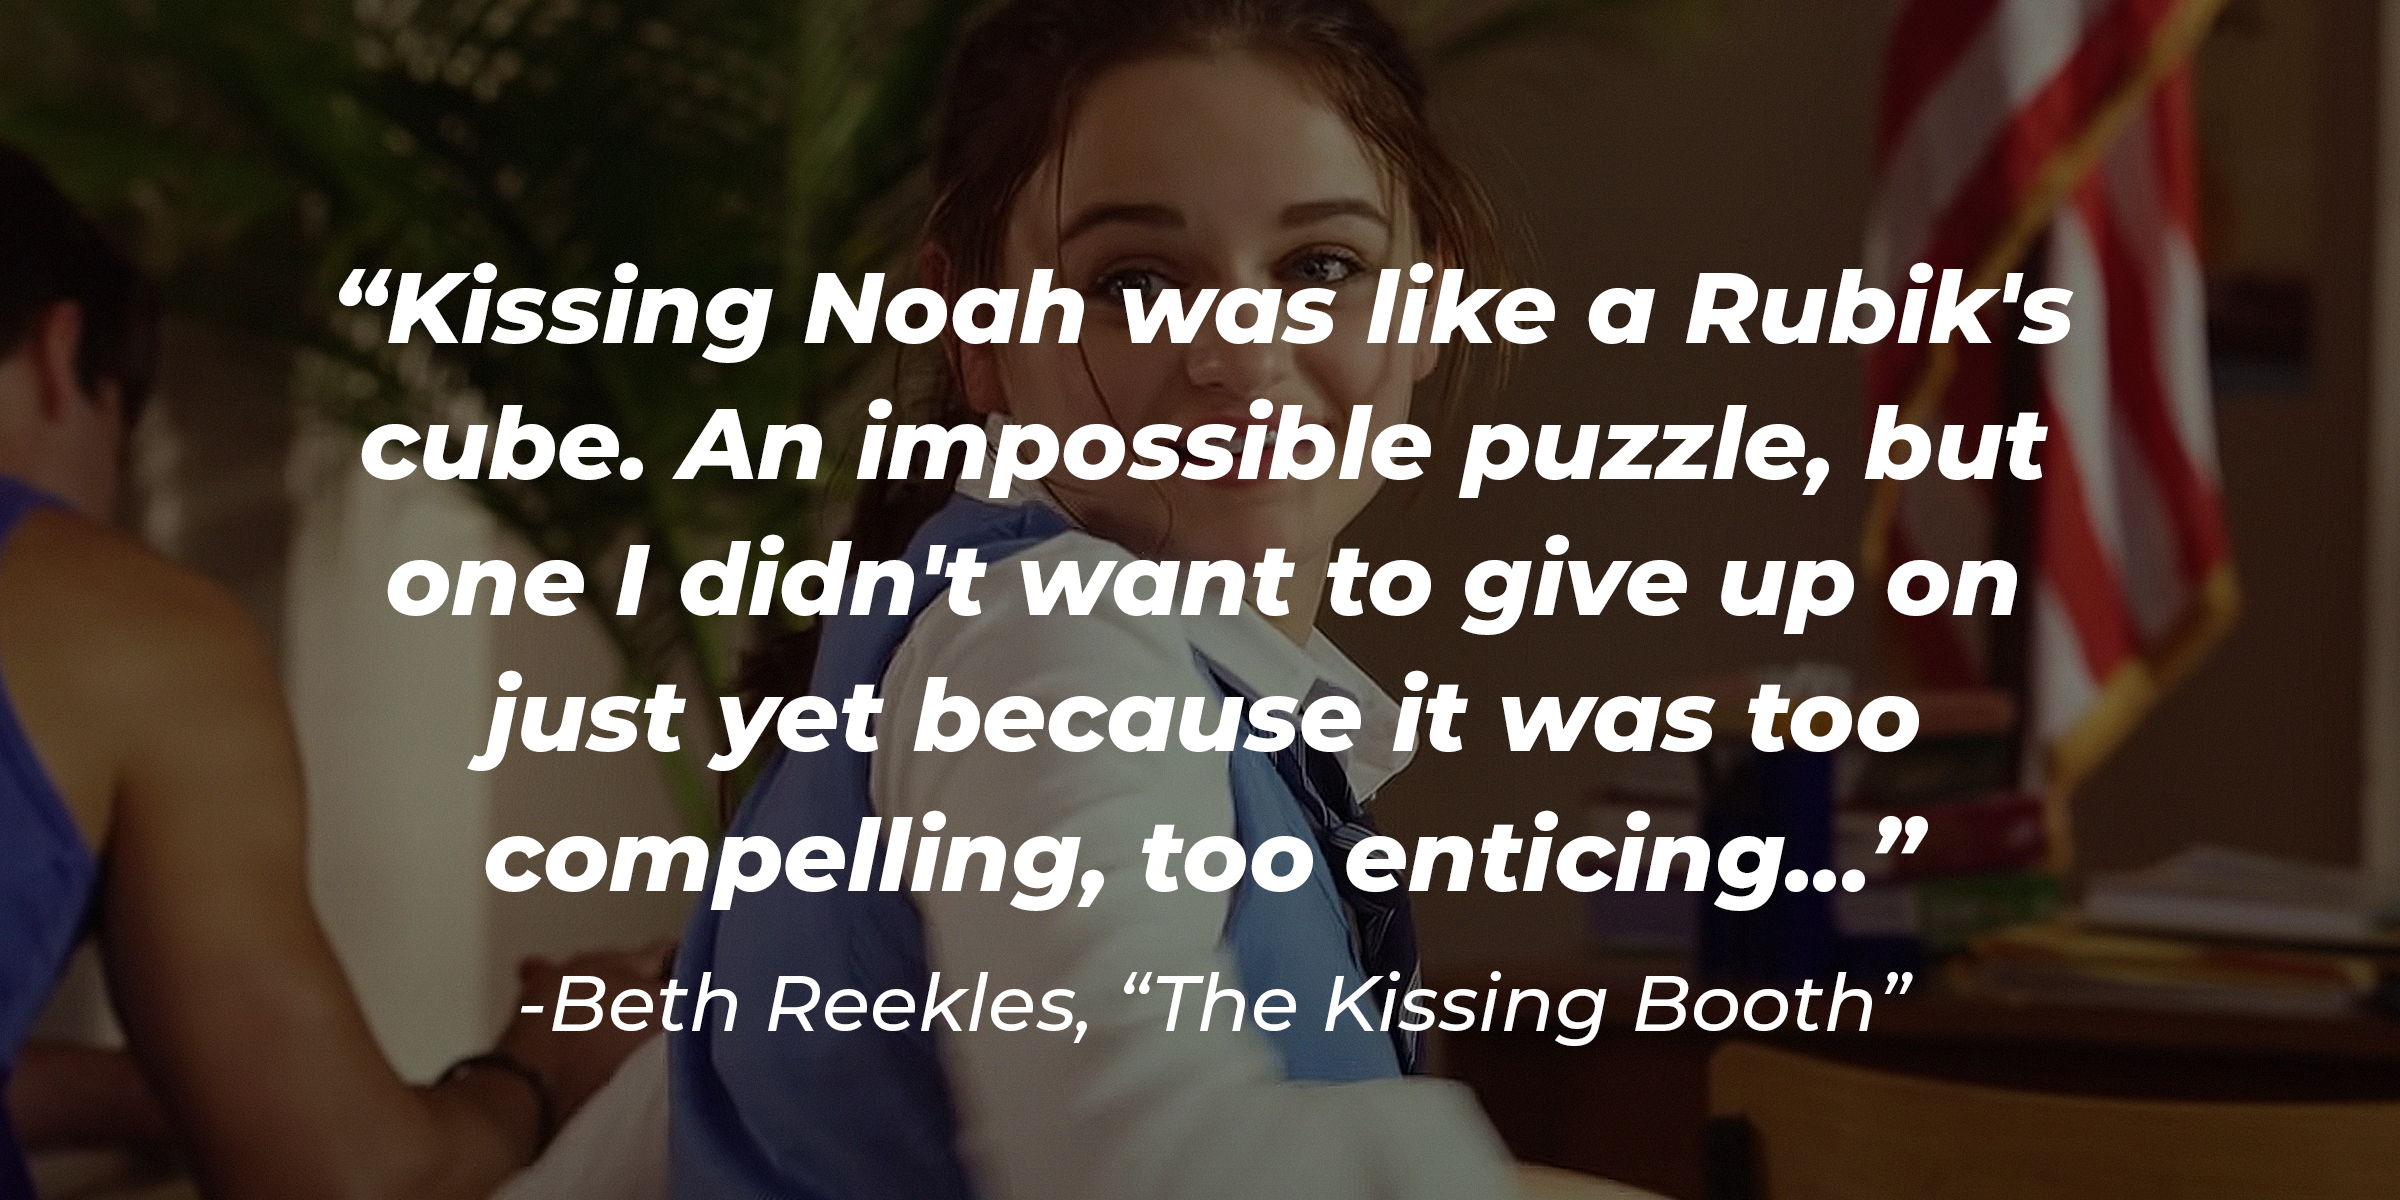 Beth Reekles’ quote: "Kissing Noah was like a Rubik's cube. An impossible puzzle, but one I didn't want to give up on just yet because it was too compelling, too enticing..." | Source: youtube.com/NetflixBehindTheStreamsm/NetflixBehindTheStreams